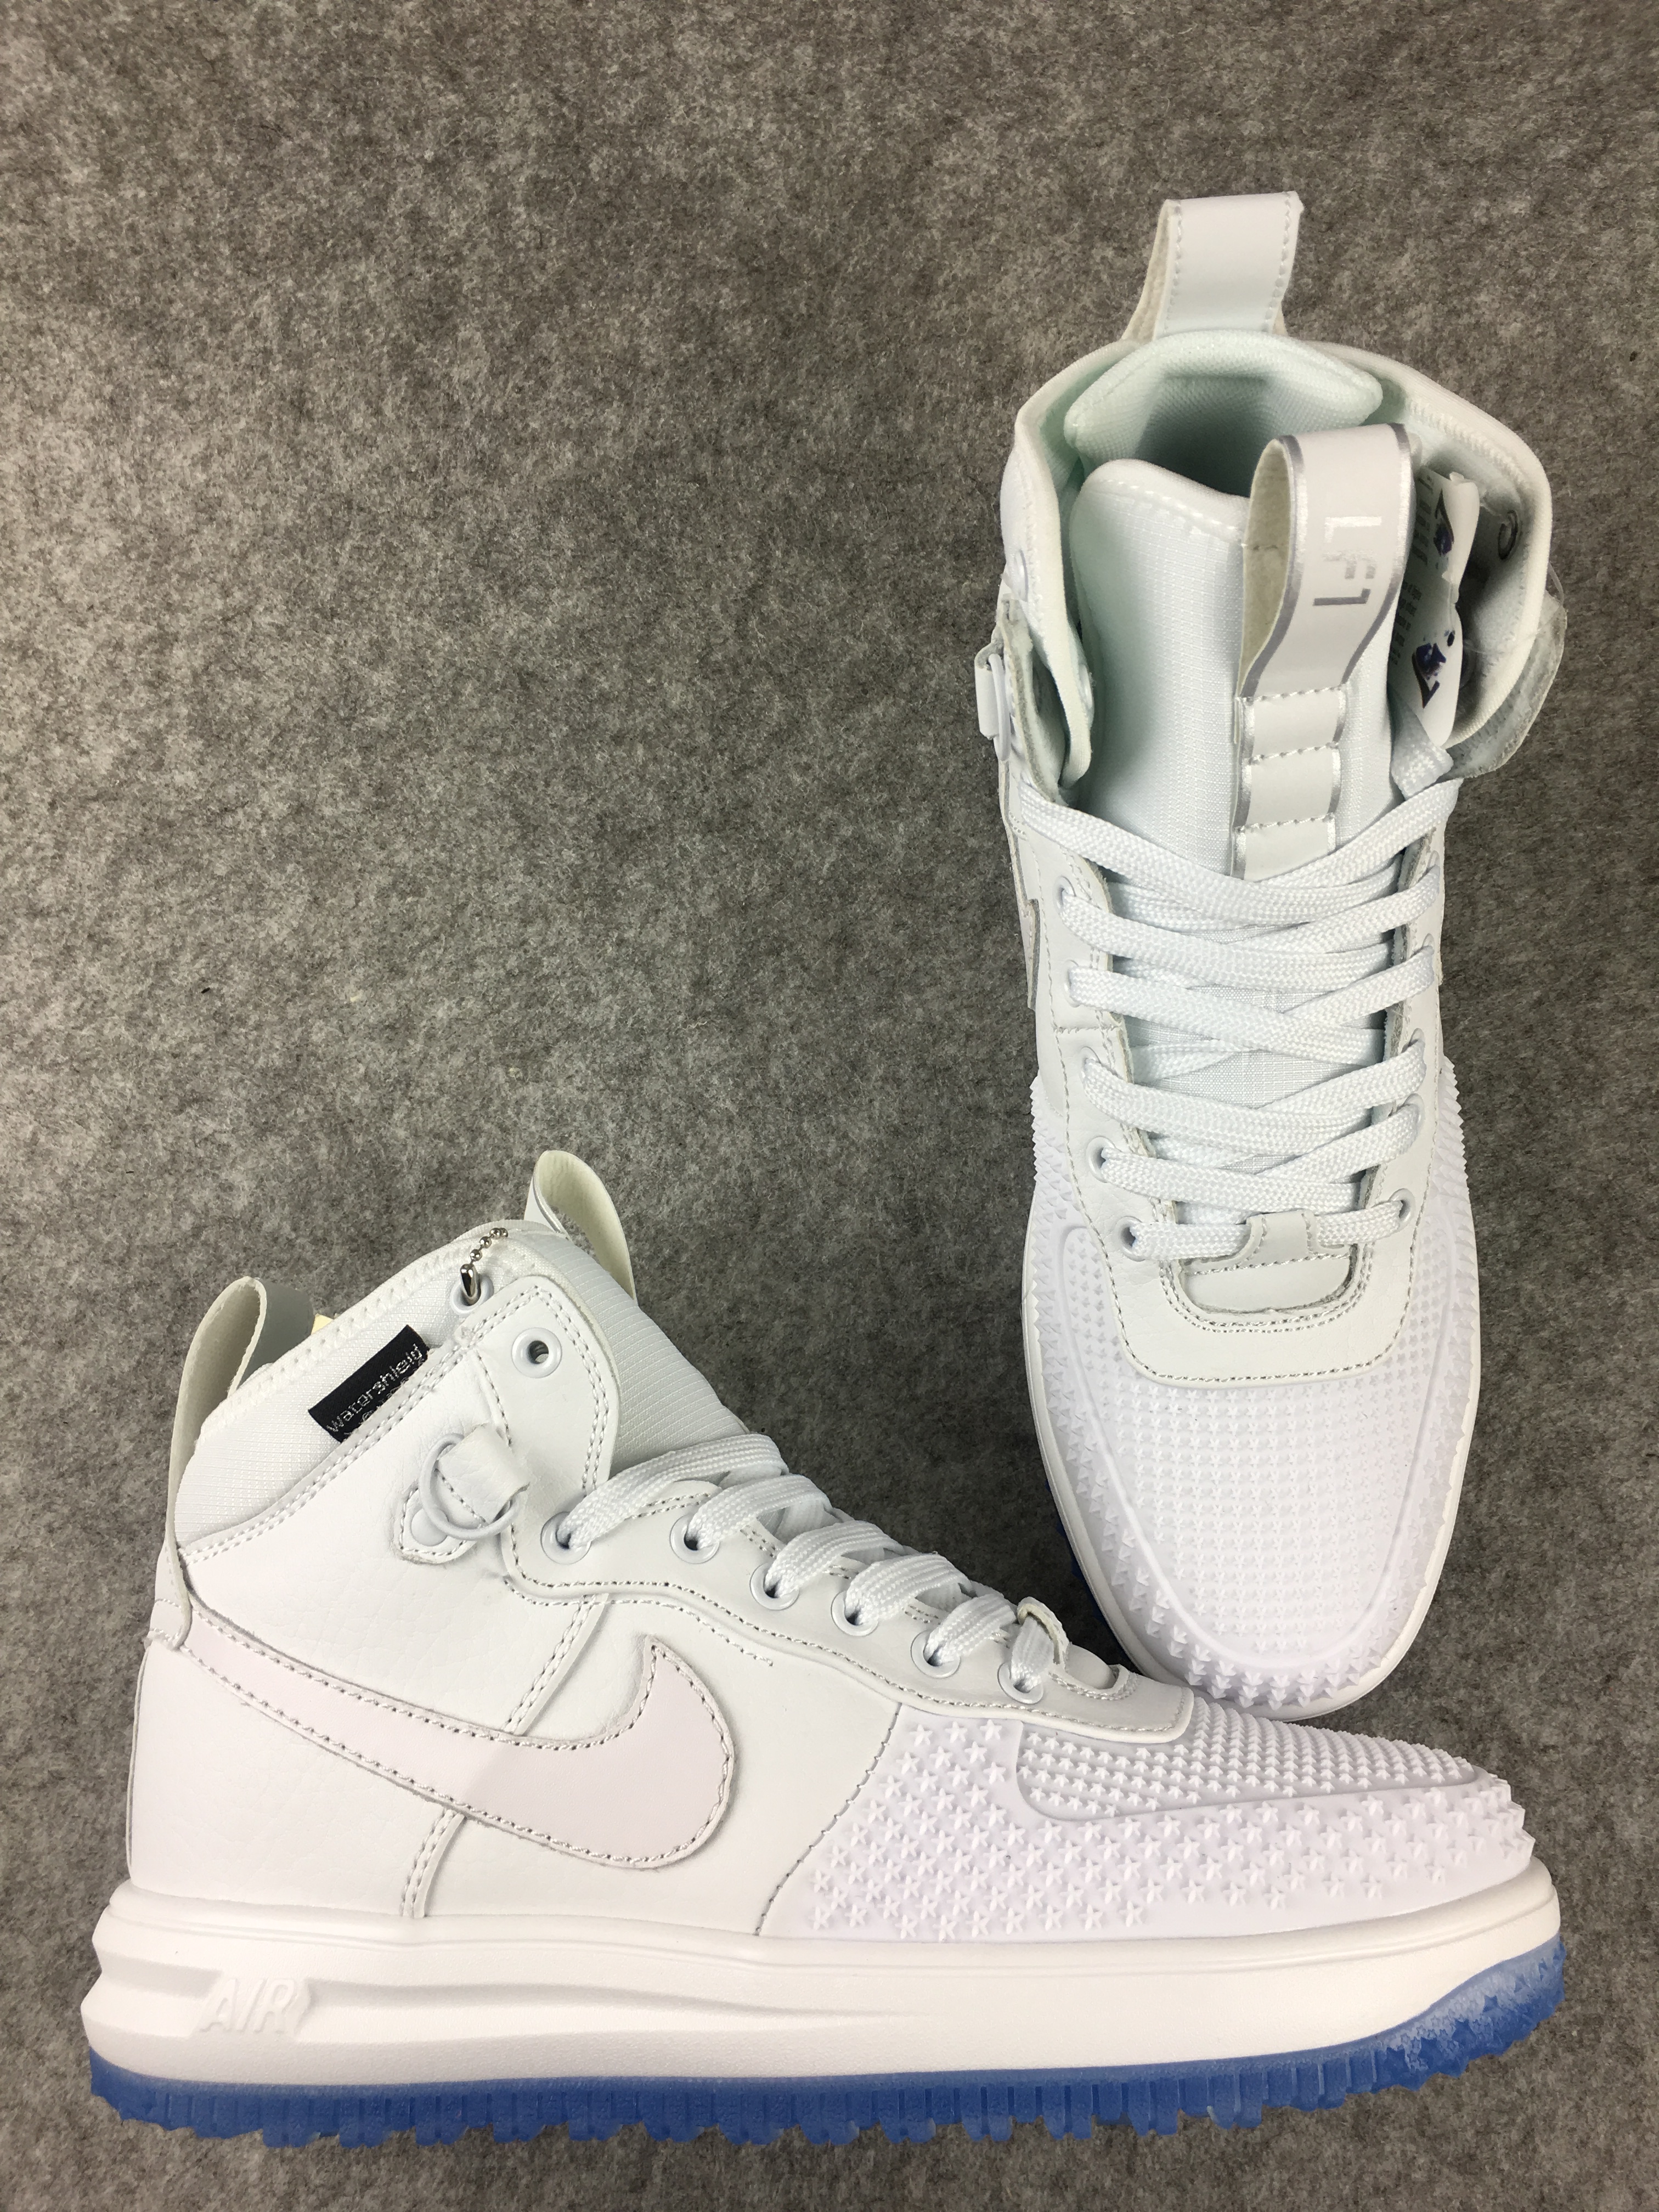 New Nike Lunar Force 1 High All White Shoes